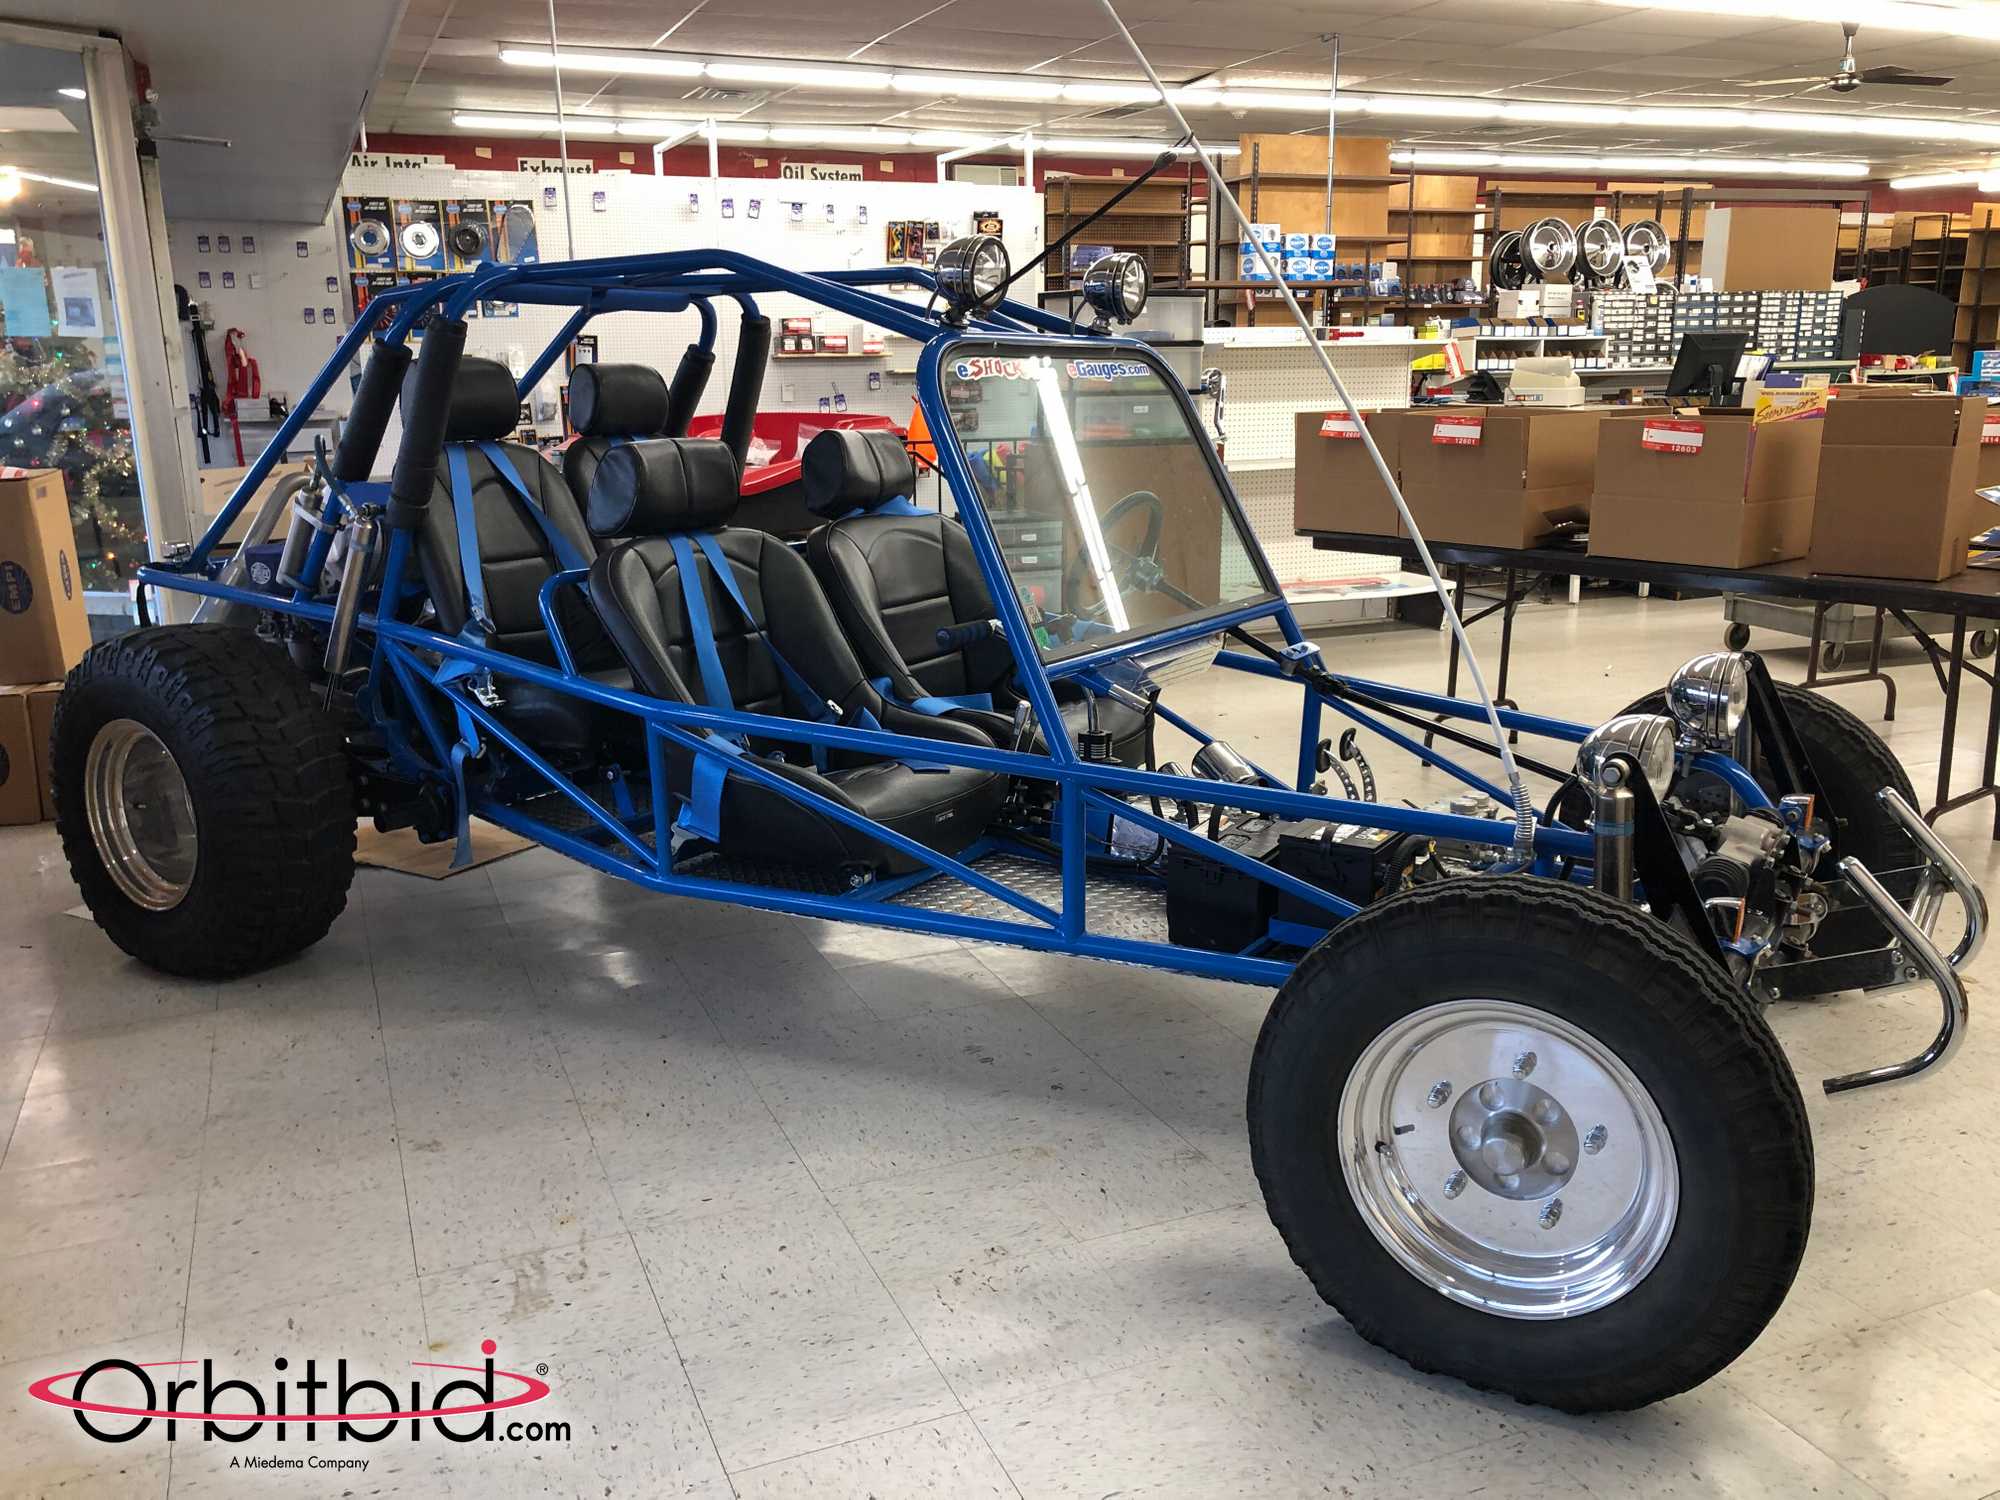 Don's Sport Vehicle | Online Sport Vehicle Auction | One Day Auction